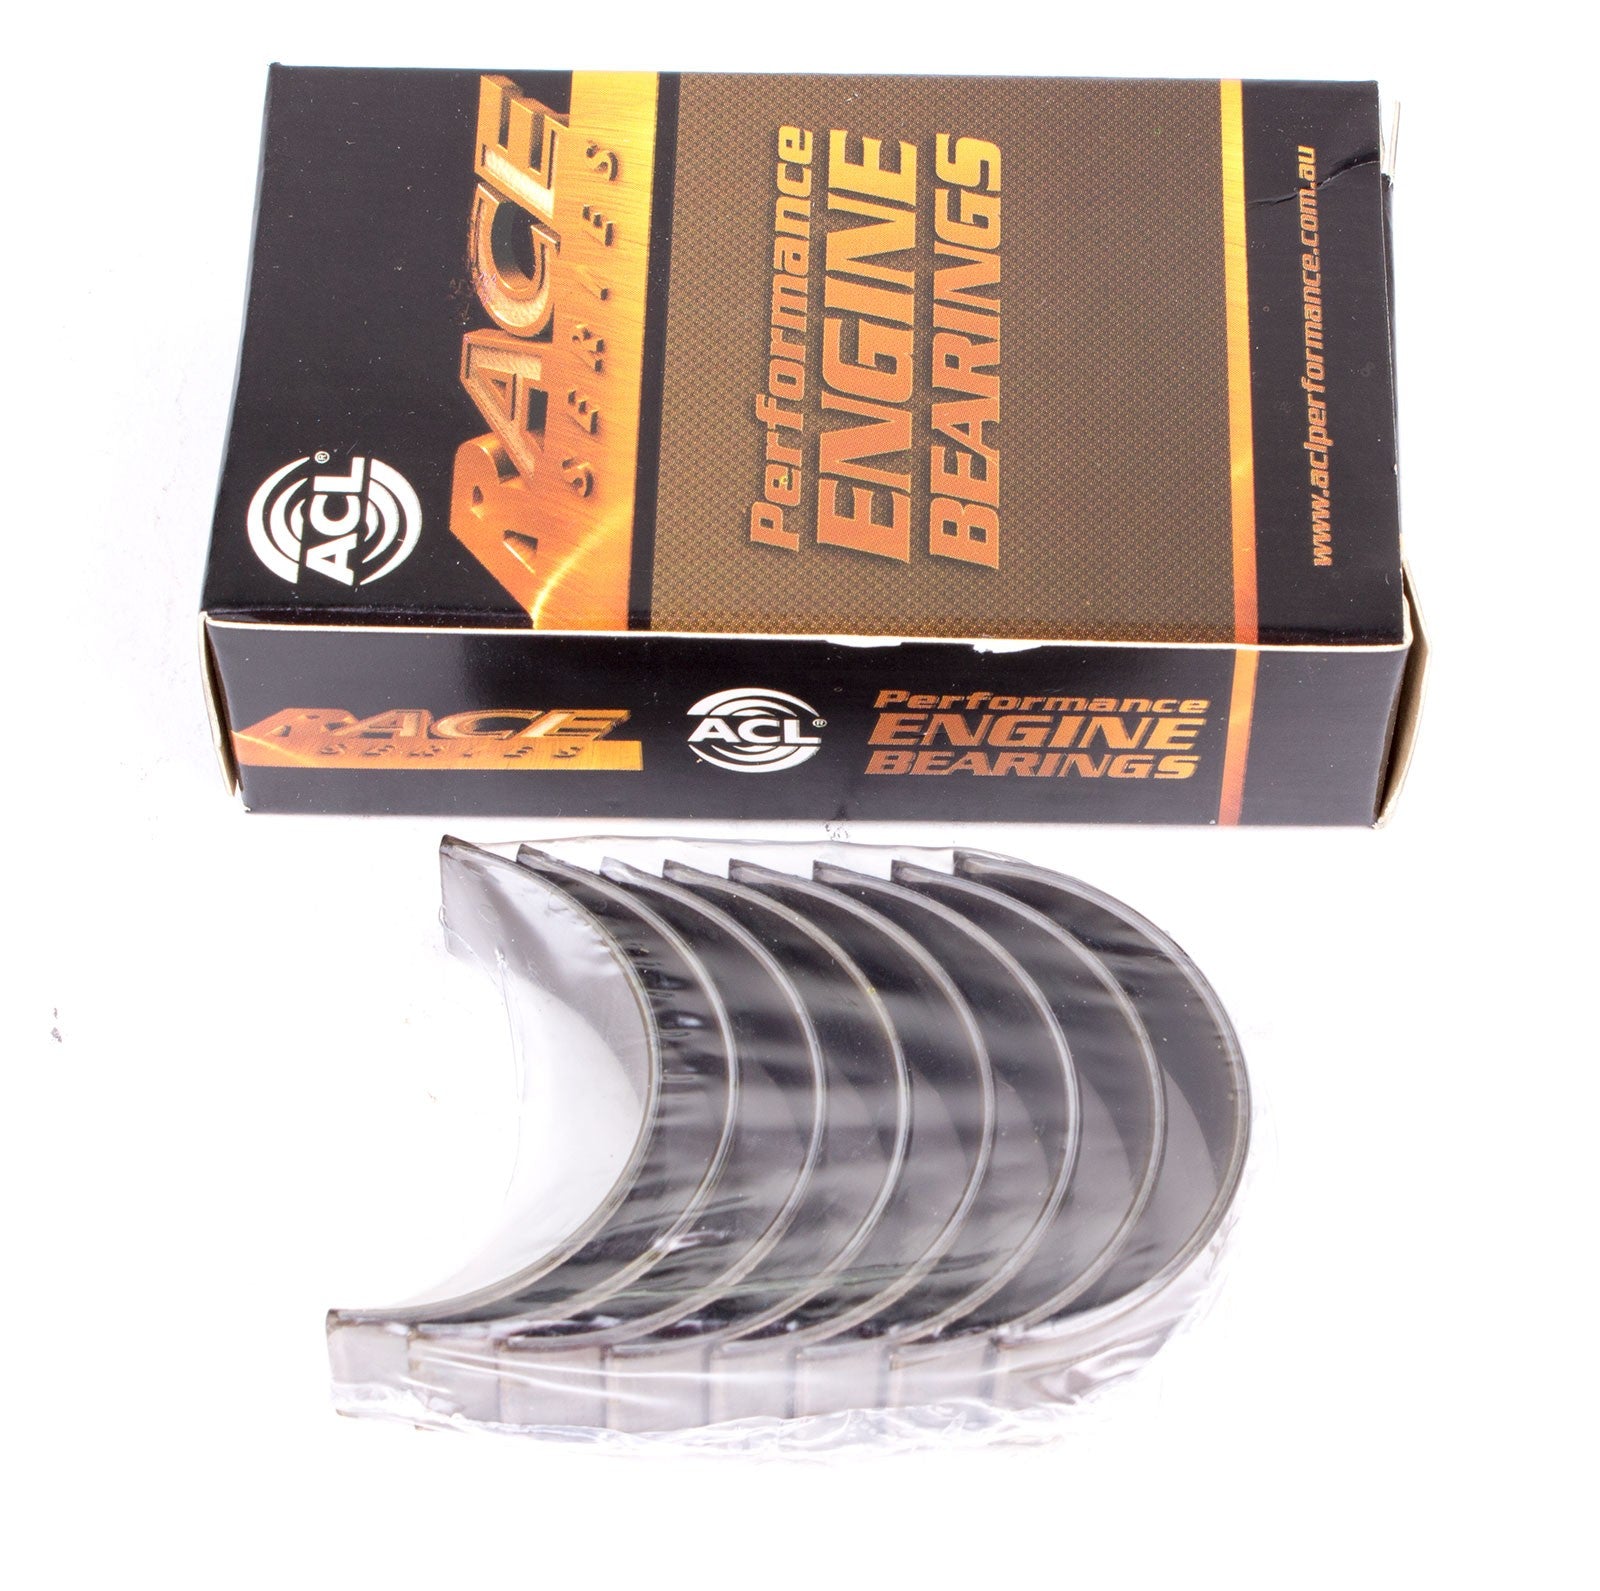 ACL 6B2150H-010 Con rod bearing set (ACL Race Series) Photo-0 